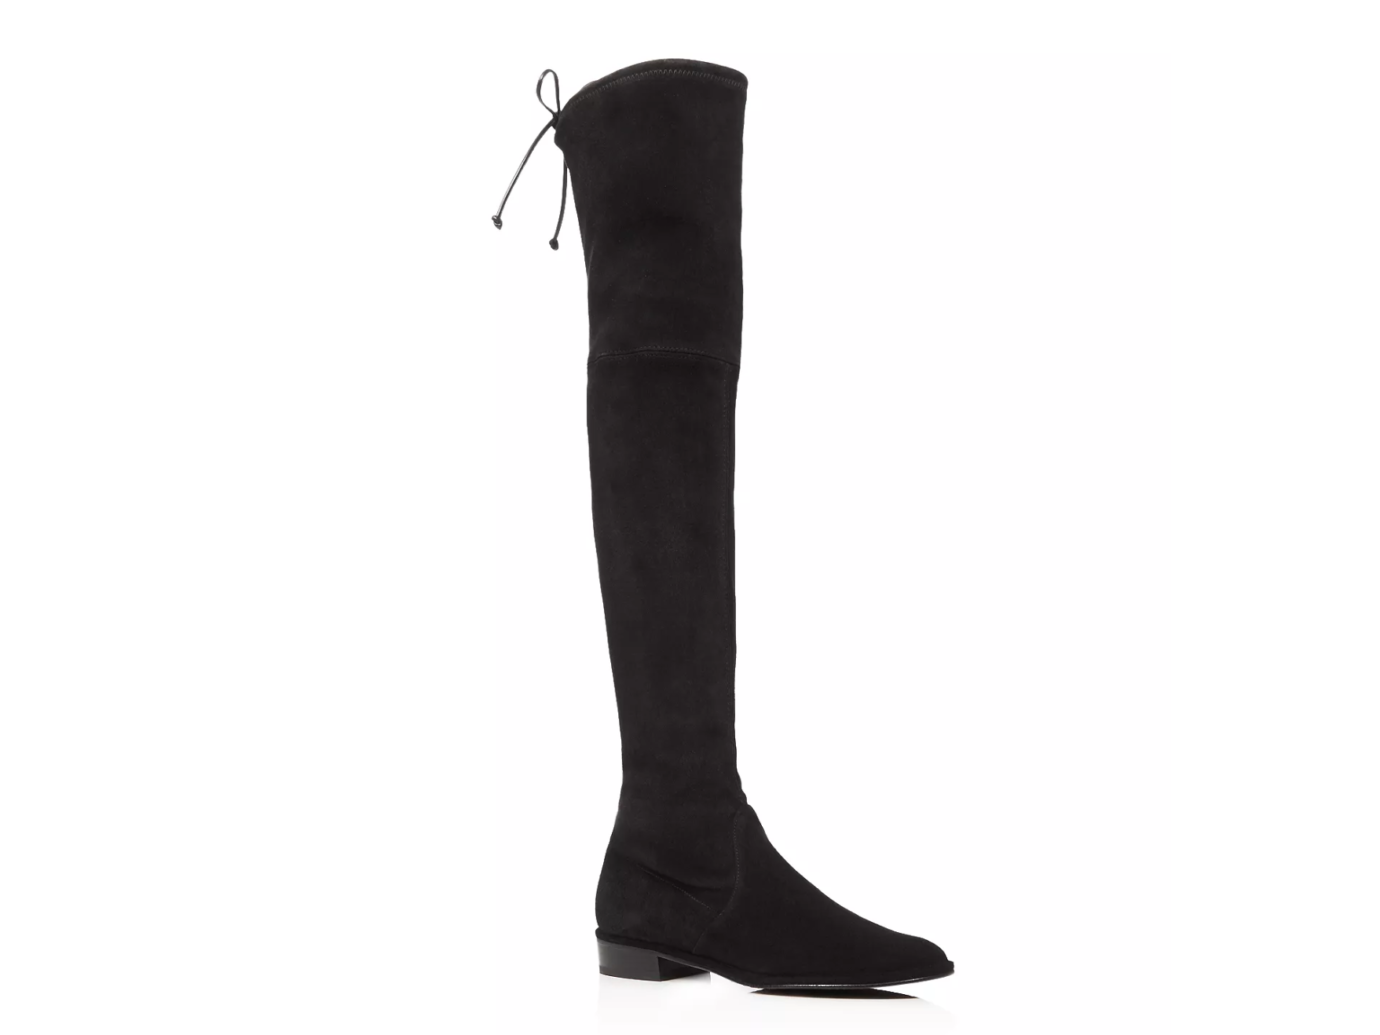 Stuart Weitzman Lowland Stretch Suede Over-the-Knee Boots